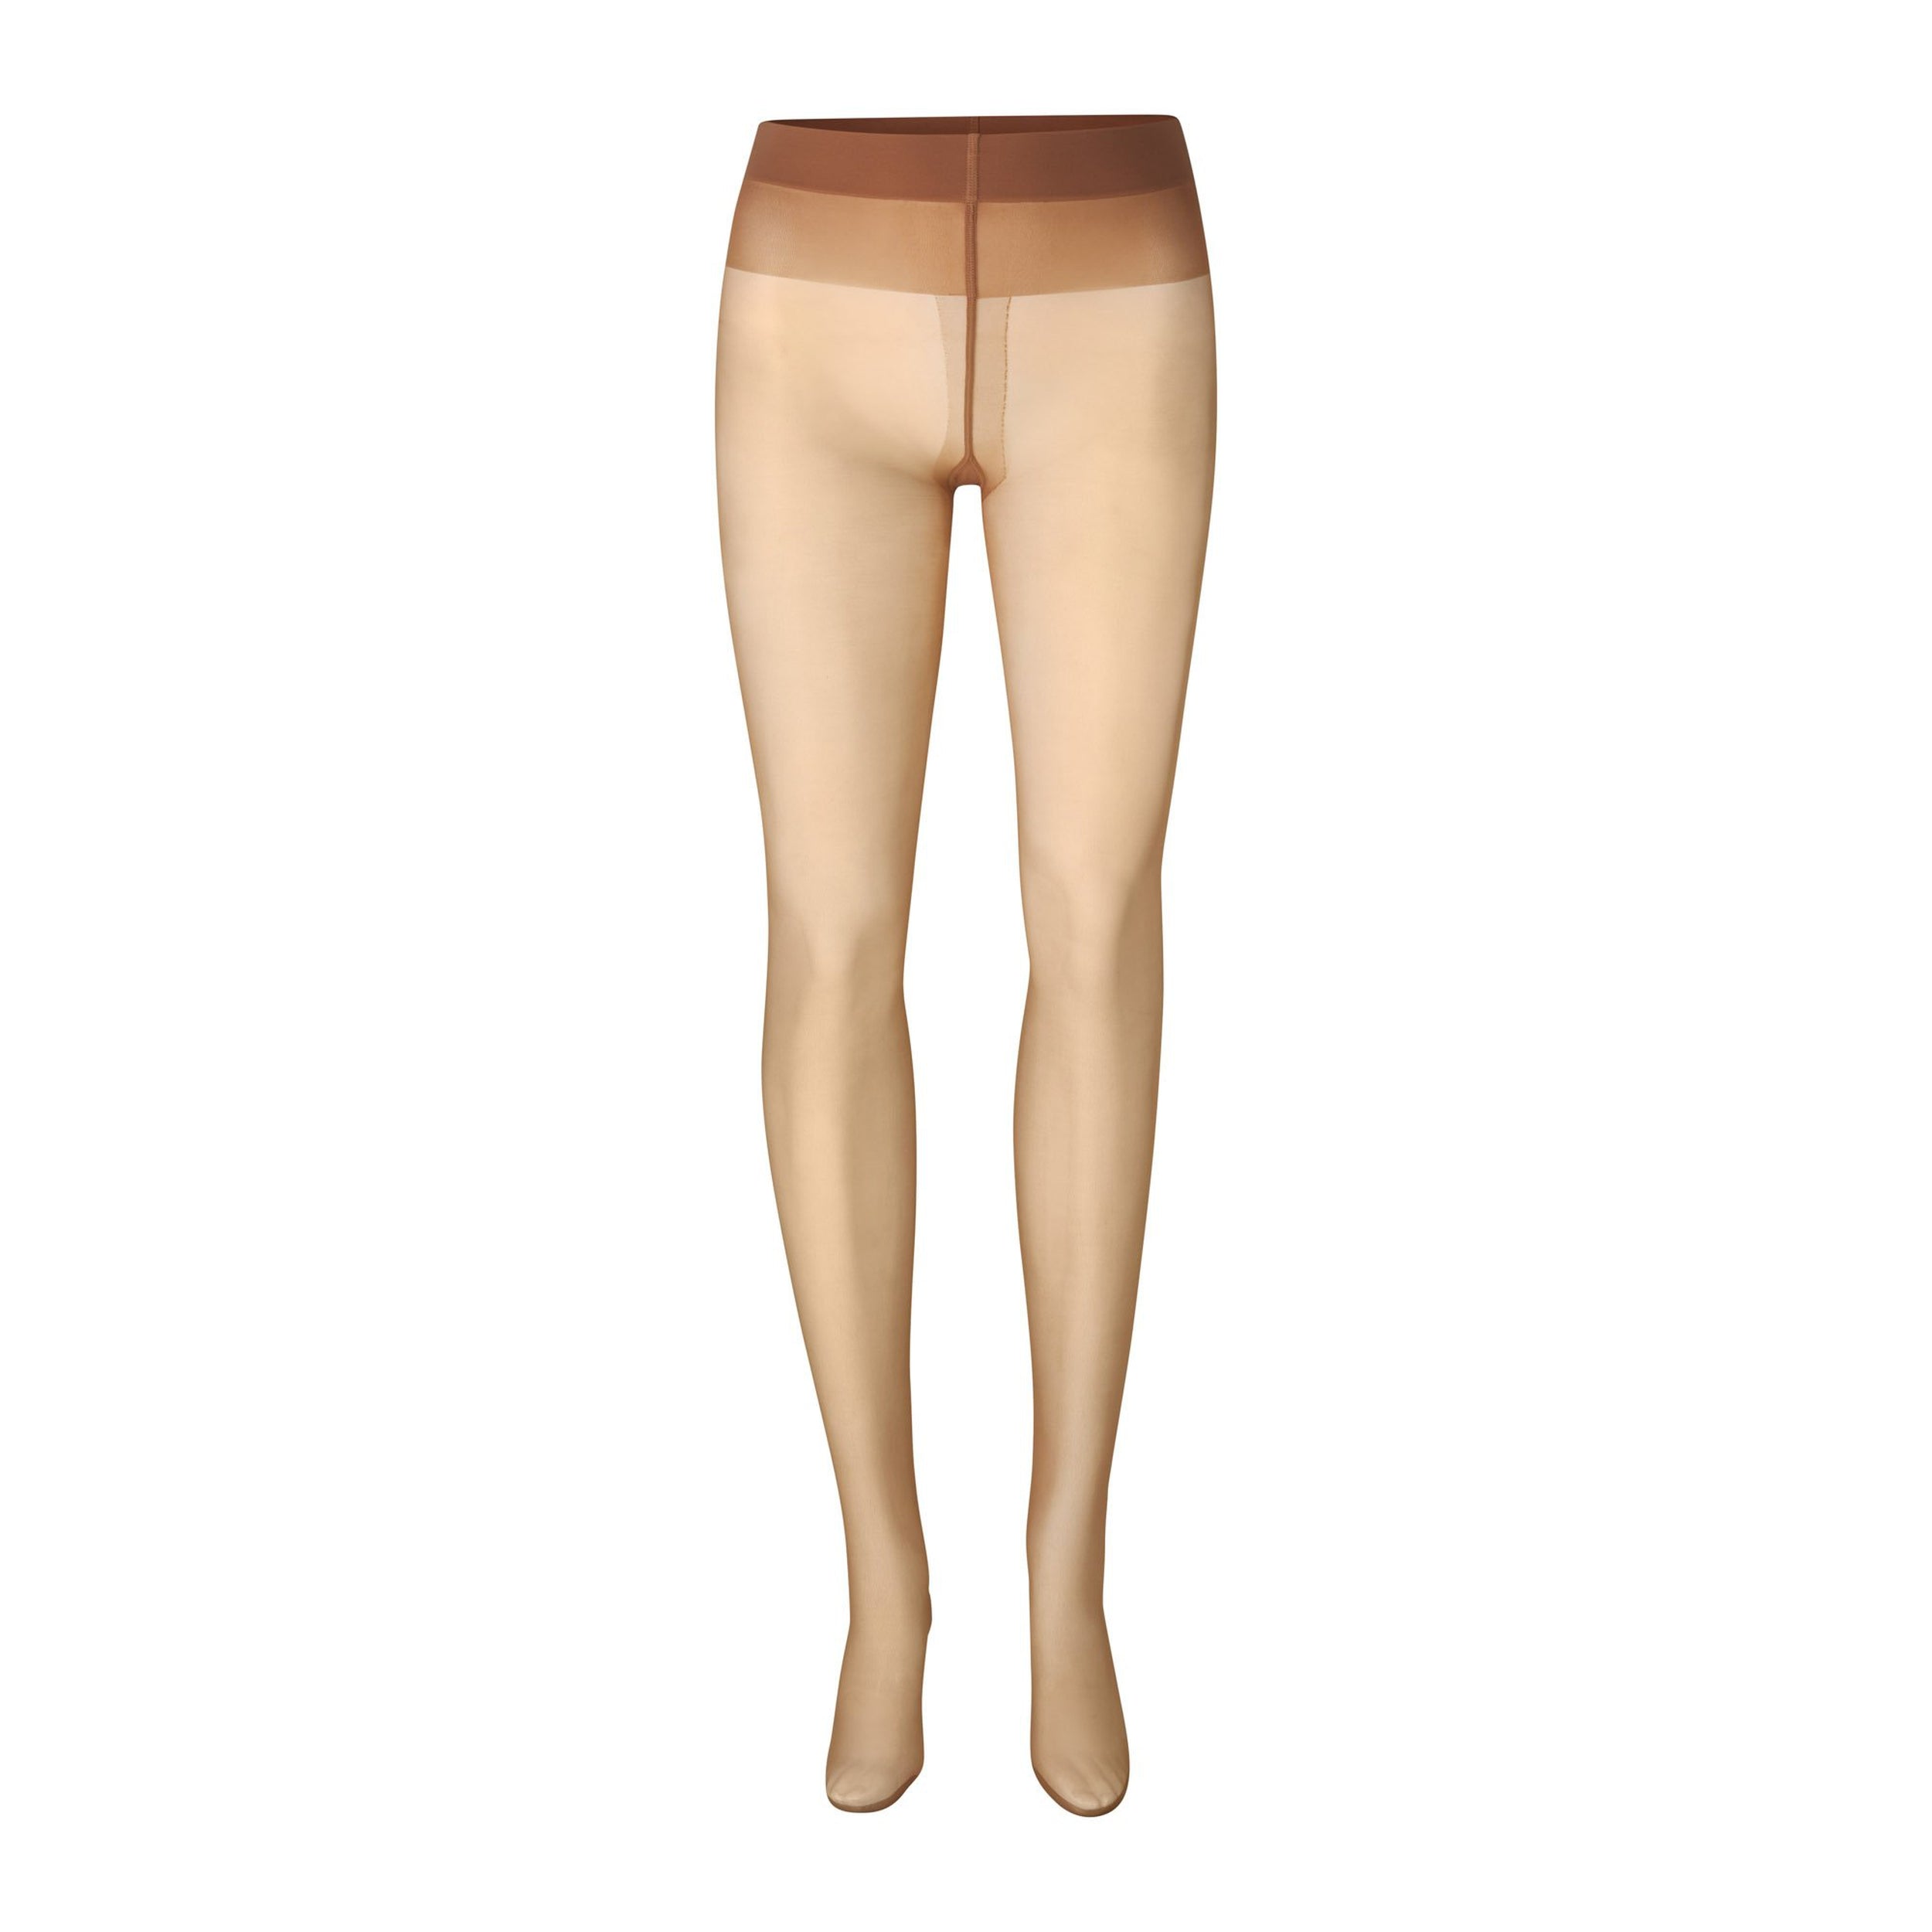 NUDE SUPPORT TIGHTS